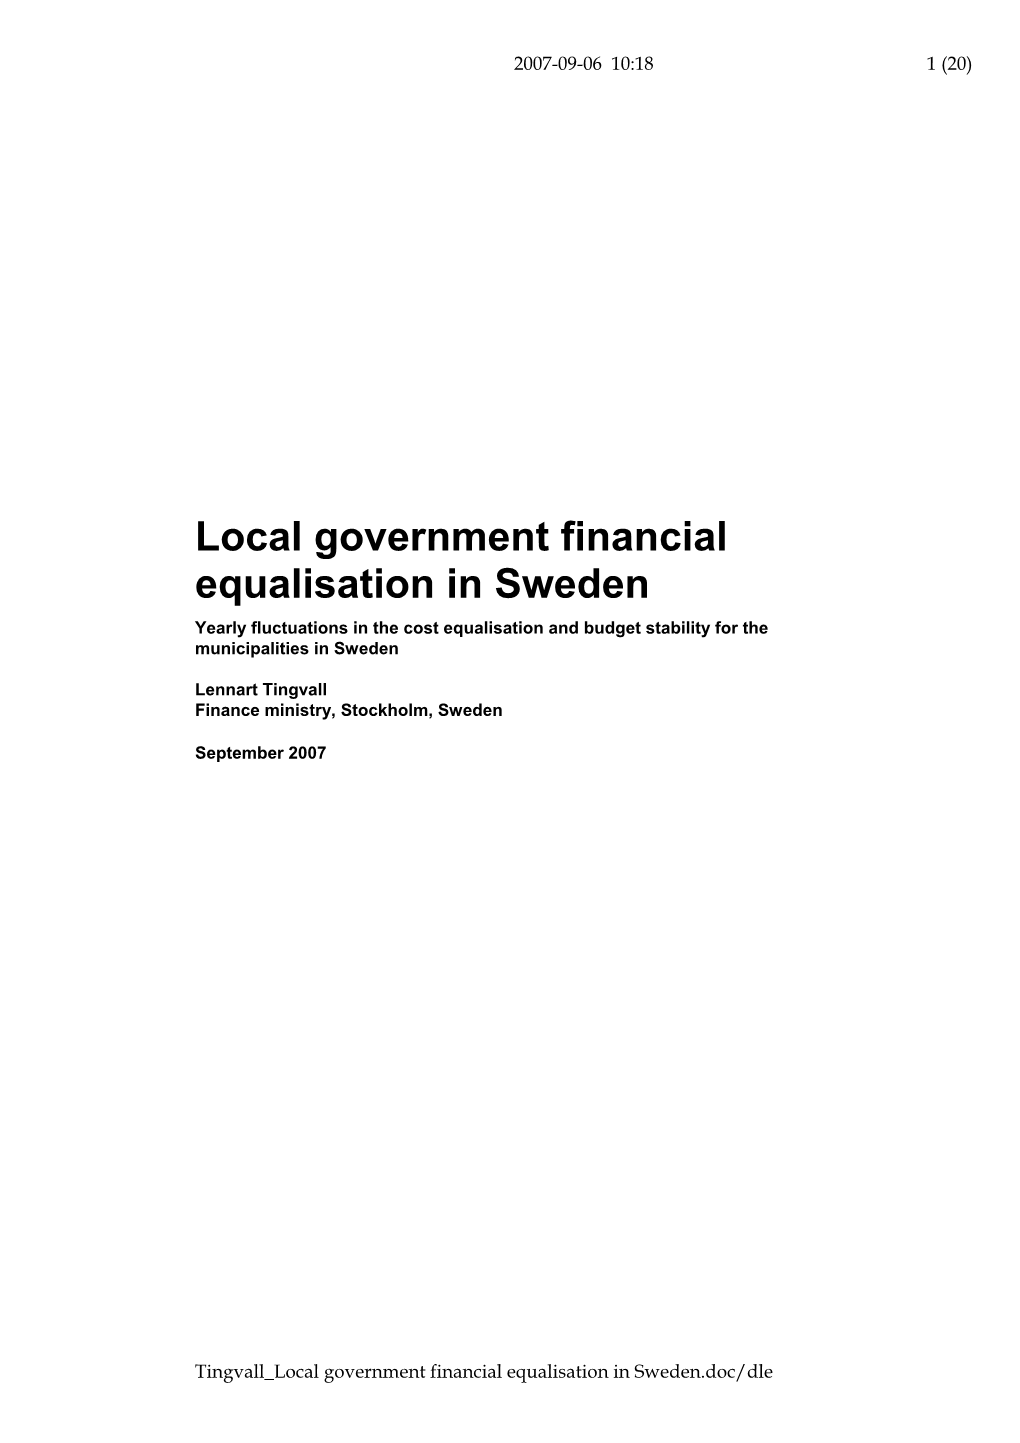 Local Government Financial Equalisation in Sweden Yearly Fluctuations in the Cost Equalisation and Budget Stability for the Municipalities in Sweden